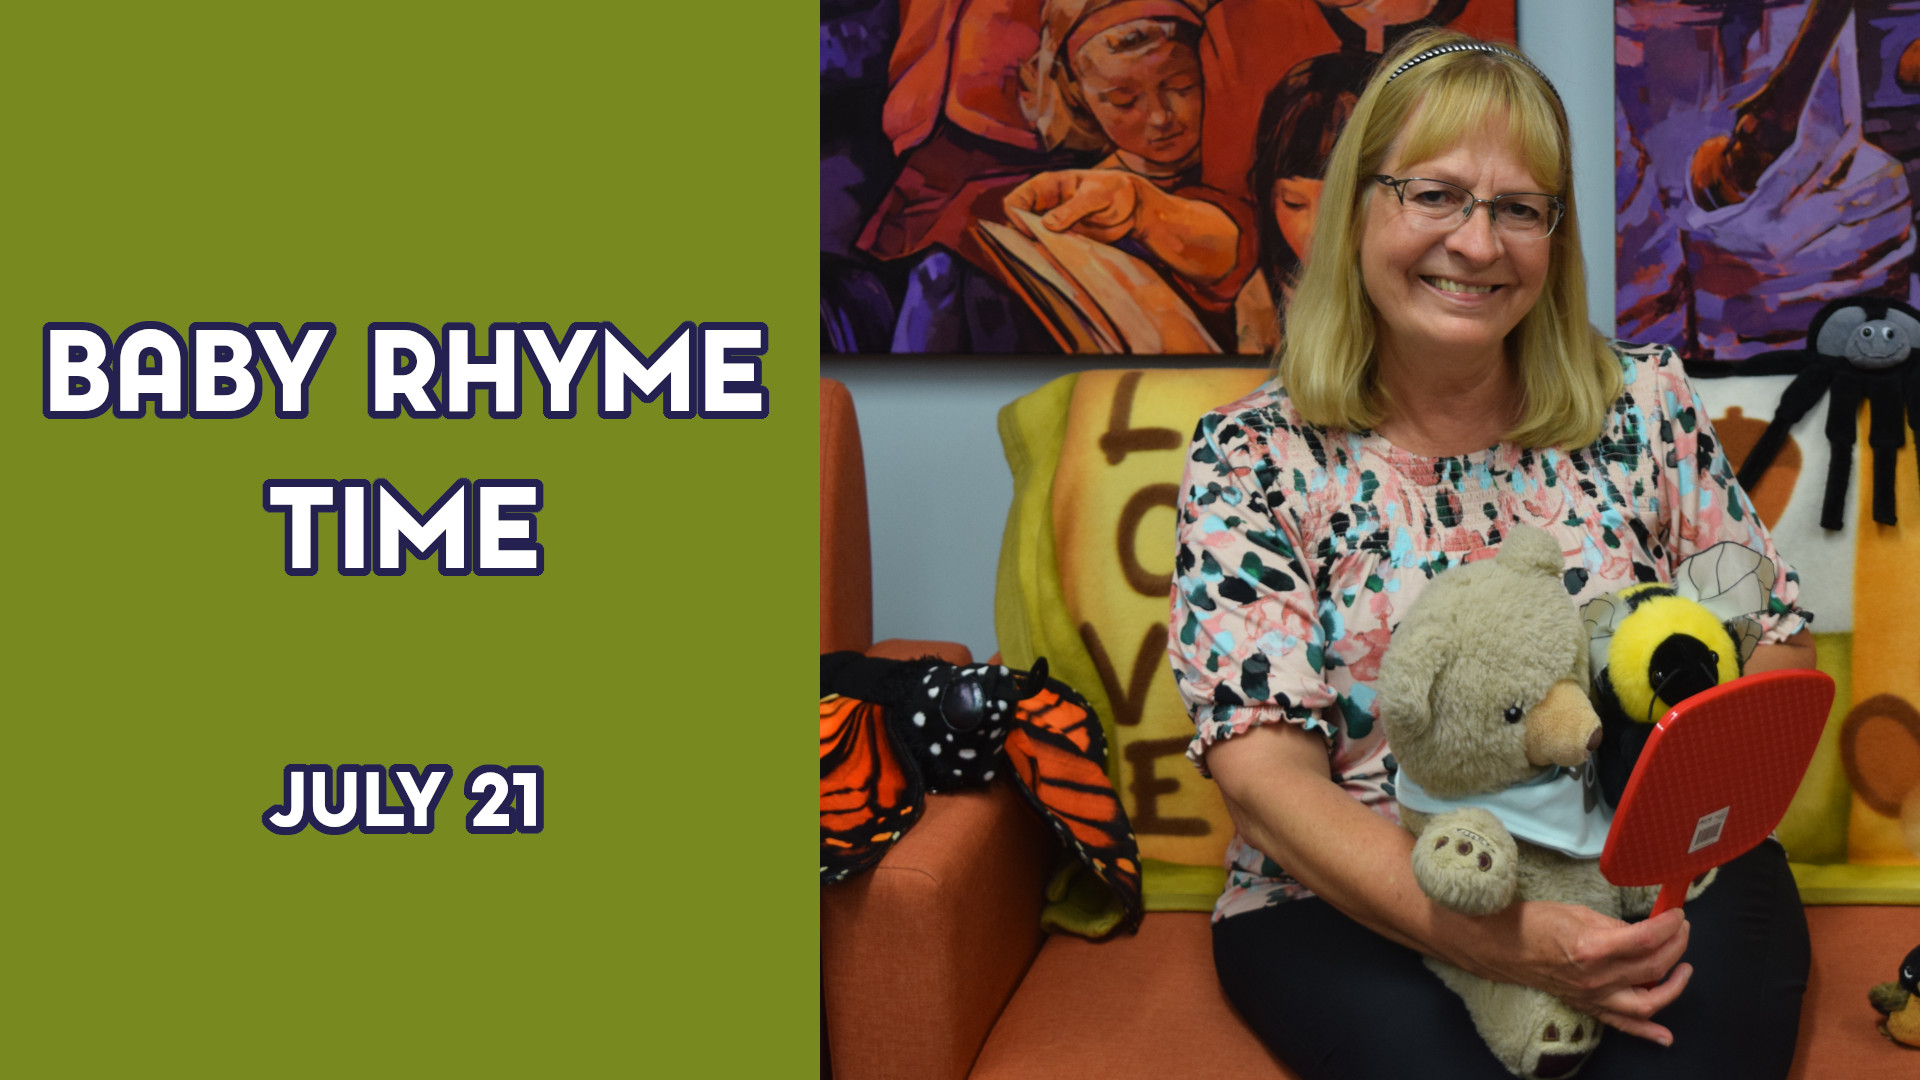 A woman holds stuffed animals next to the text "Baby Rhyme Time July 21"